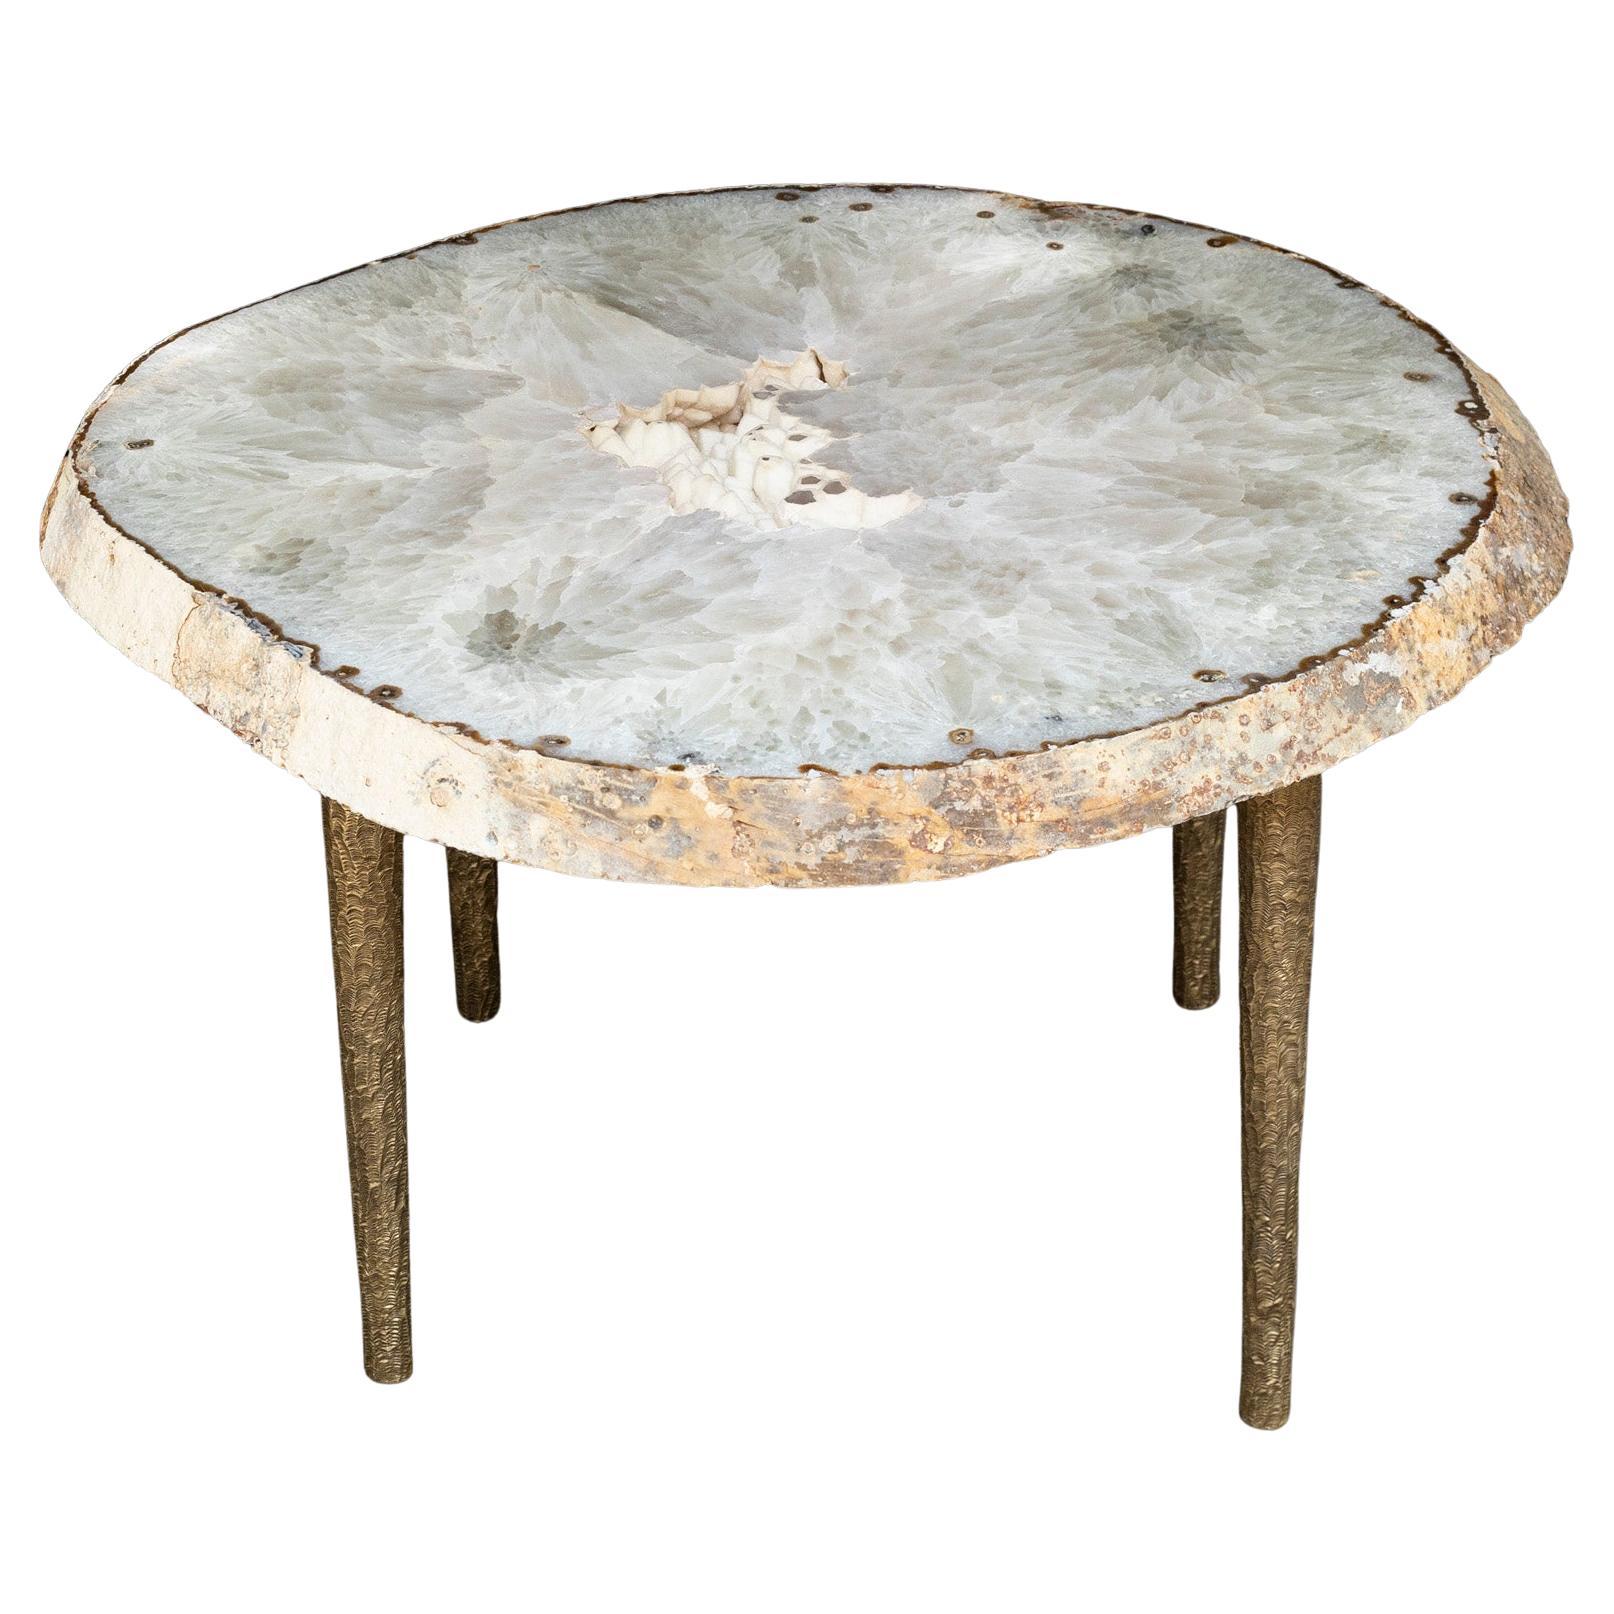 Side or Coffee Table, White Brazilian Agate with Solid Bronze Base